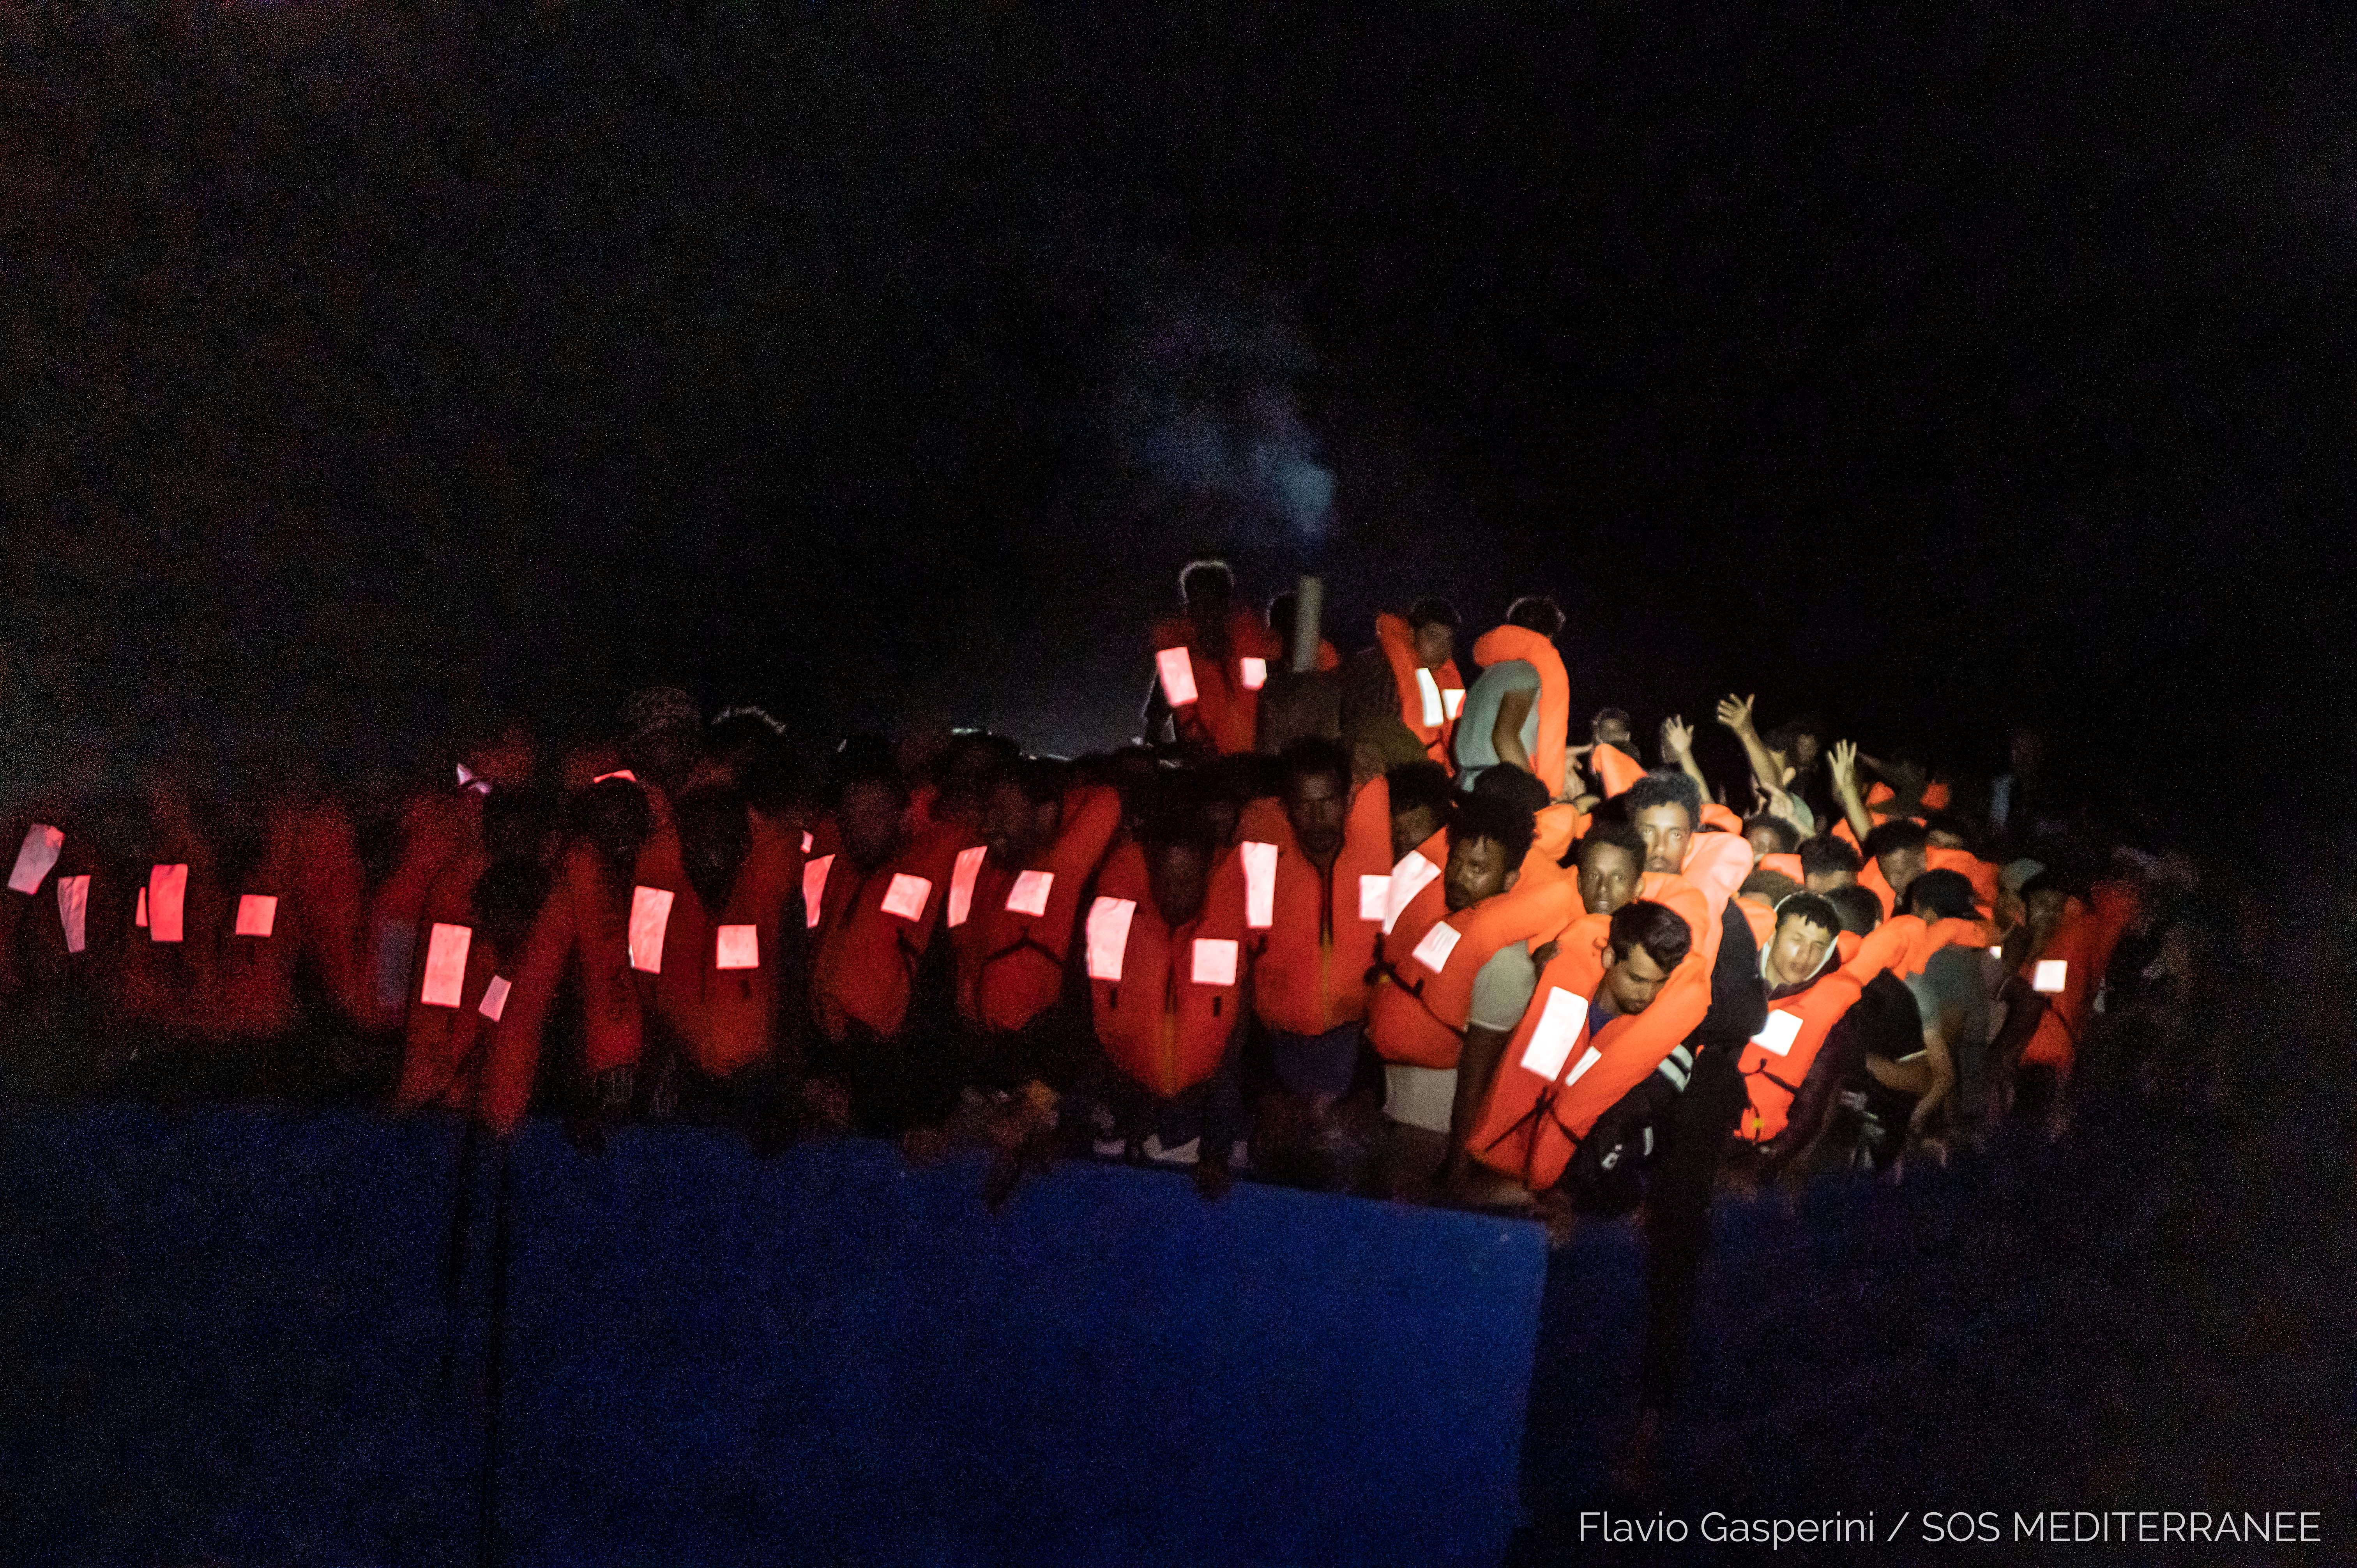 Migrants wait to be rescued by the Ocean Viking during a search and rescue (SAR) operation in the Mediterranean Sea, July 5, 2021. Picture taken July 5, 2021. Flavio Gasperini/SOS Mediterranee/Handout via REUTERS ATTENTION EDITORS - THIS IMAGE HAS BEEN SUPPLIED BY A THIRD PARTY. NO RESALES. NO ARCHIVES. MANDATORY CREDIT